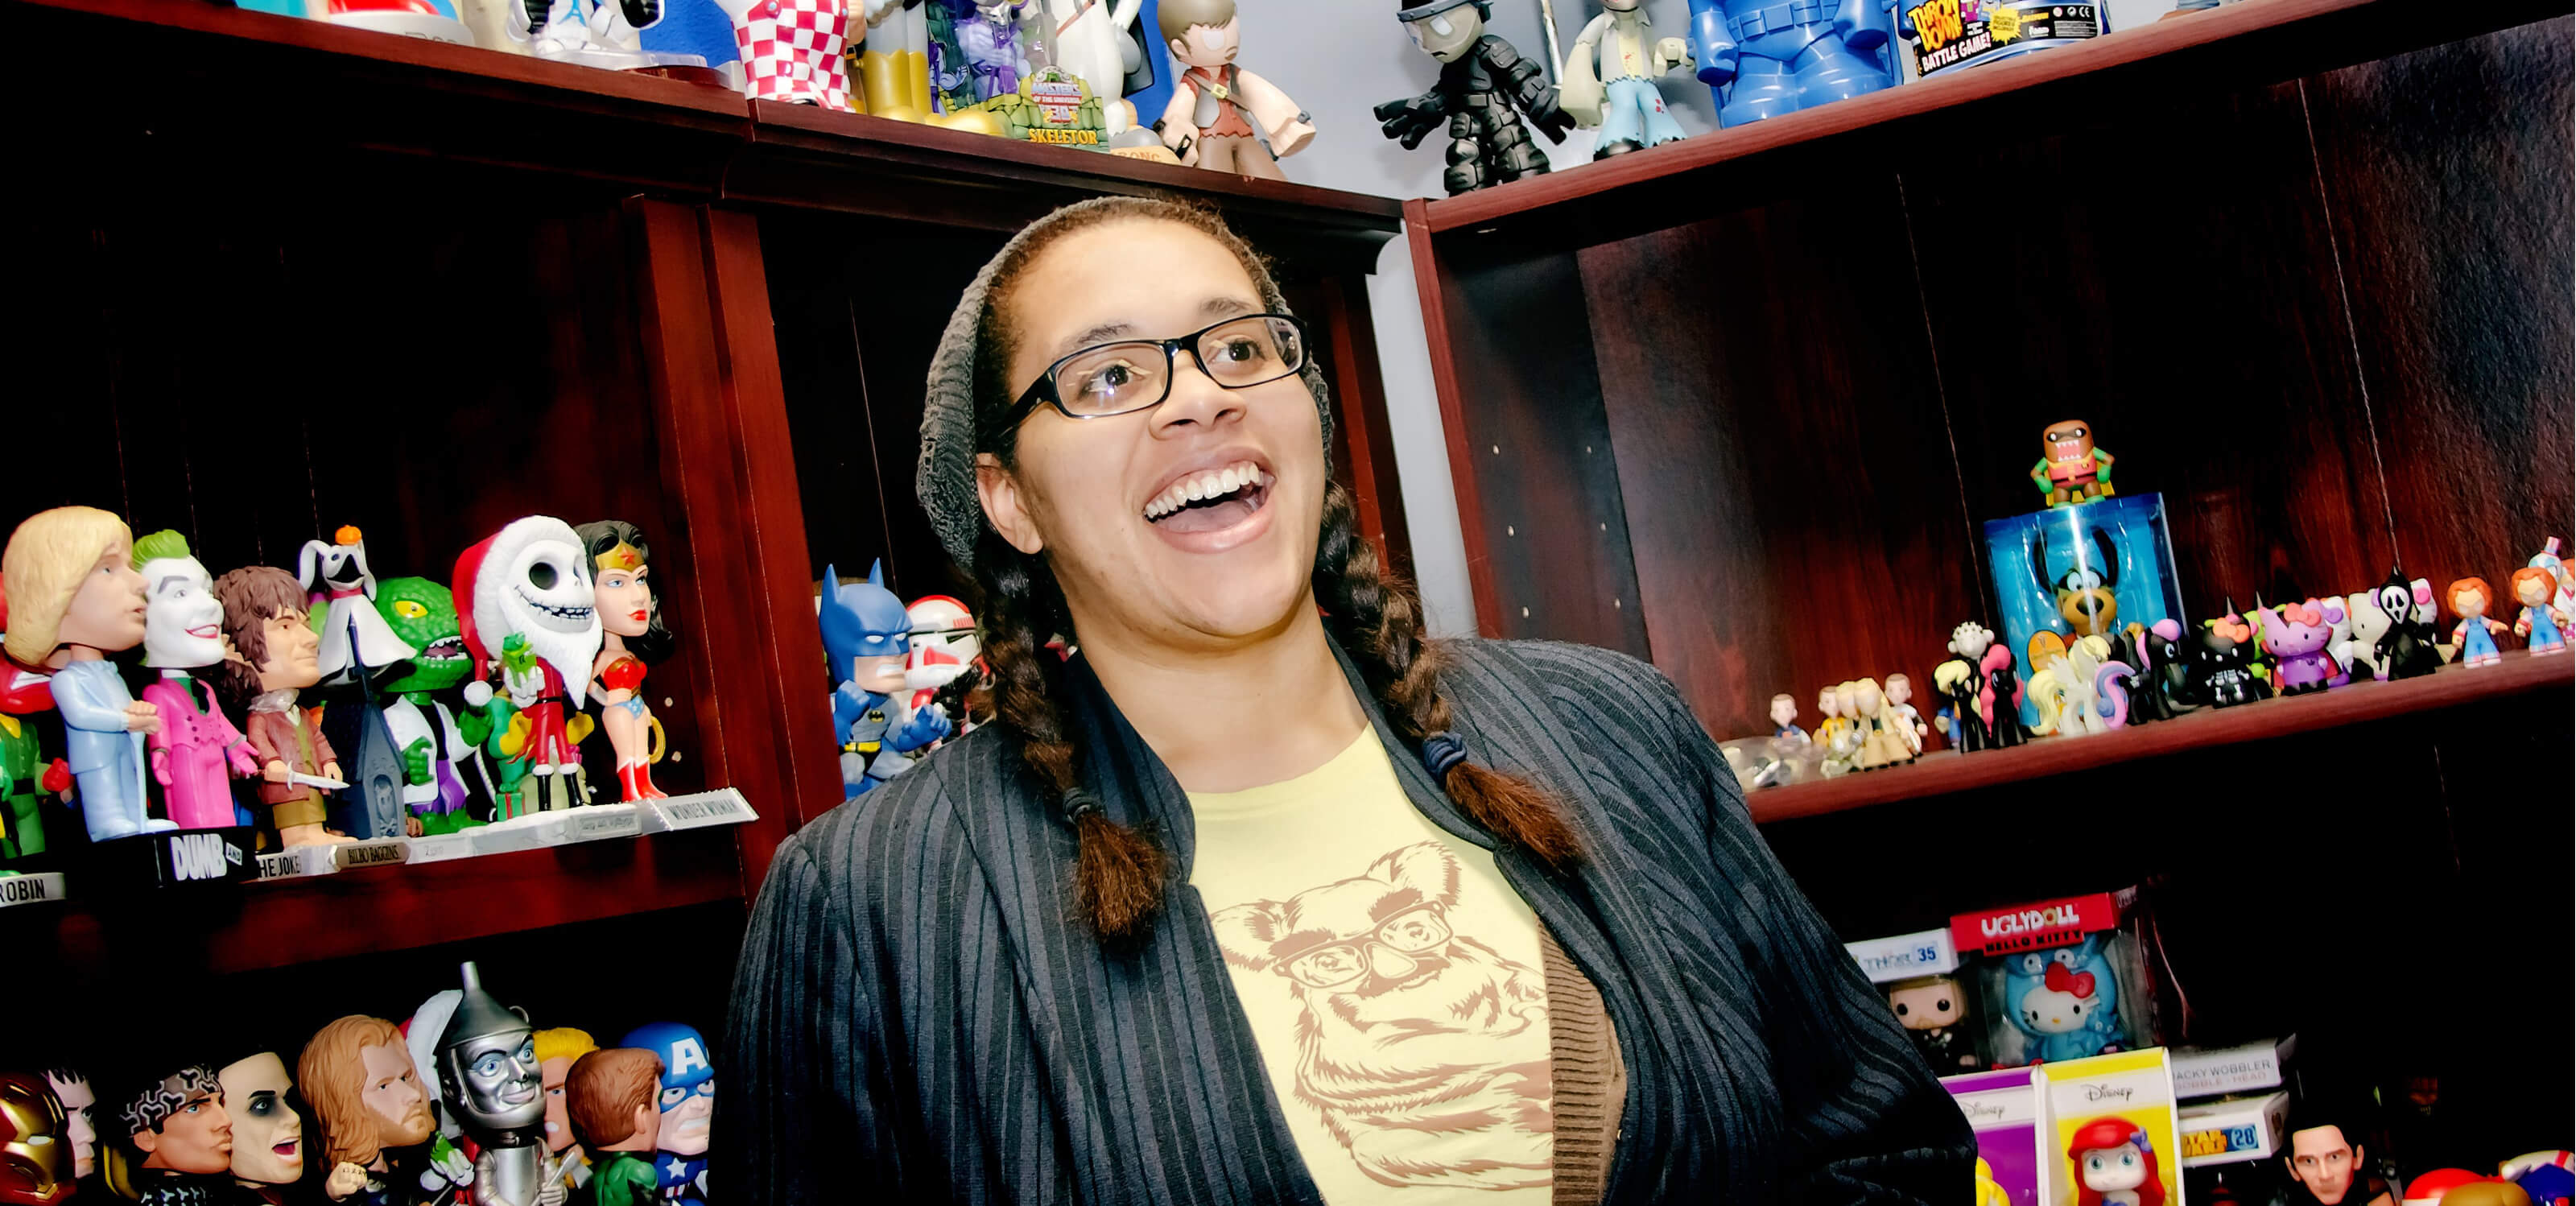 DigiPen BFA alumna Nnenna Ijiomah smiling in front of bookshelves filled with Funko figurines at the Funko office